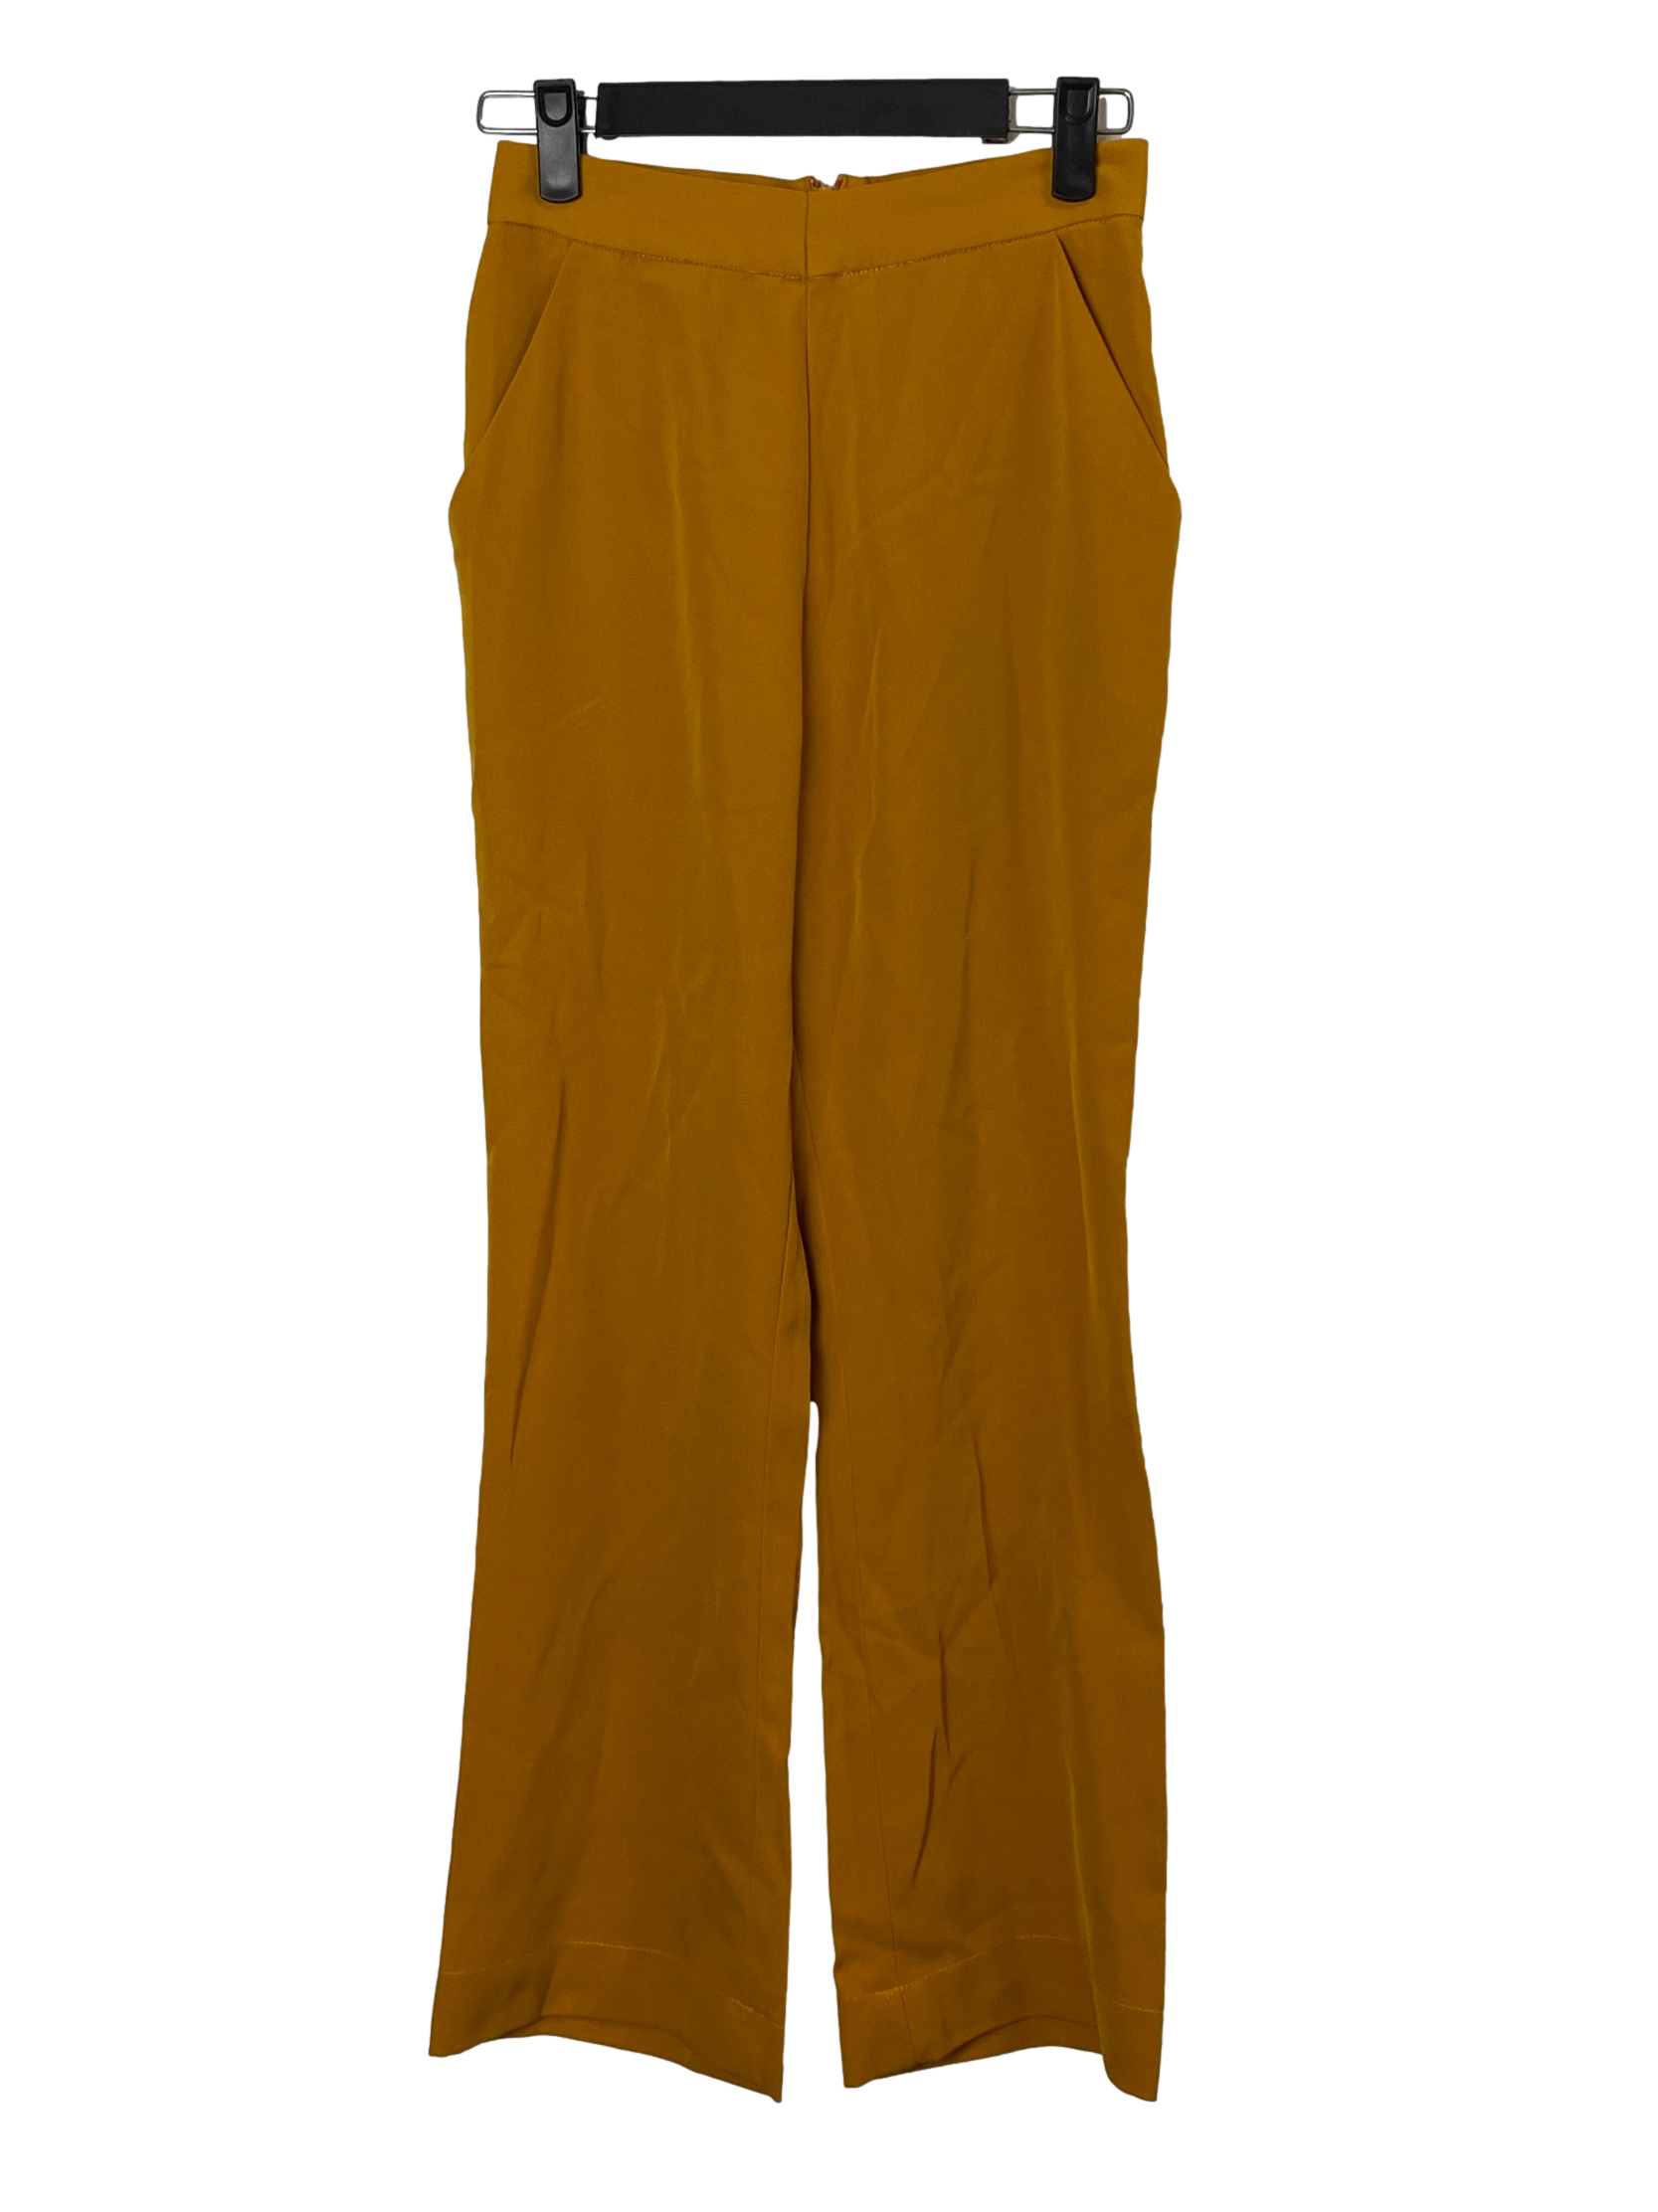 Canary Formal Pants